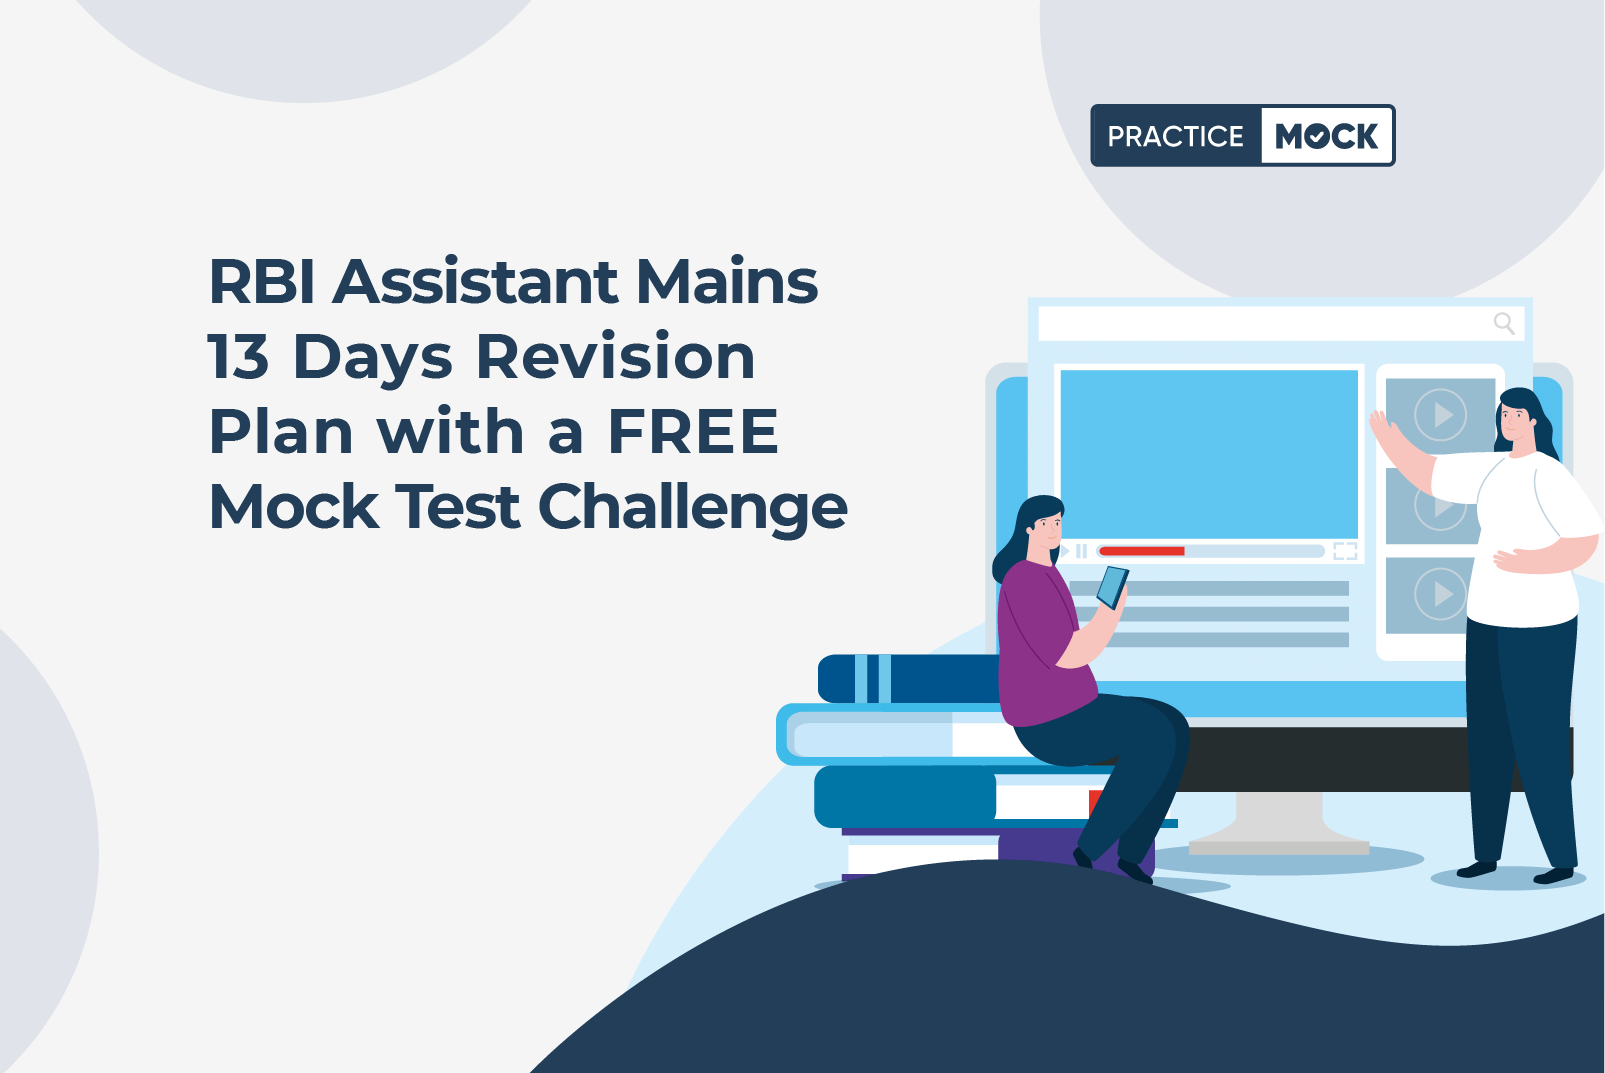 RBI Assistant Mains 13 Days Revision Plan with a FREE Mock Test Challenge